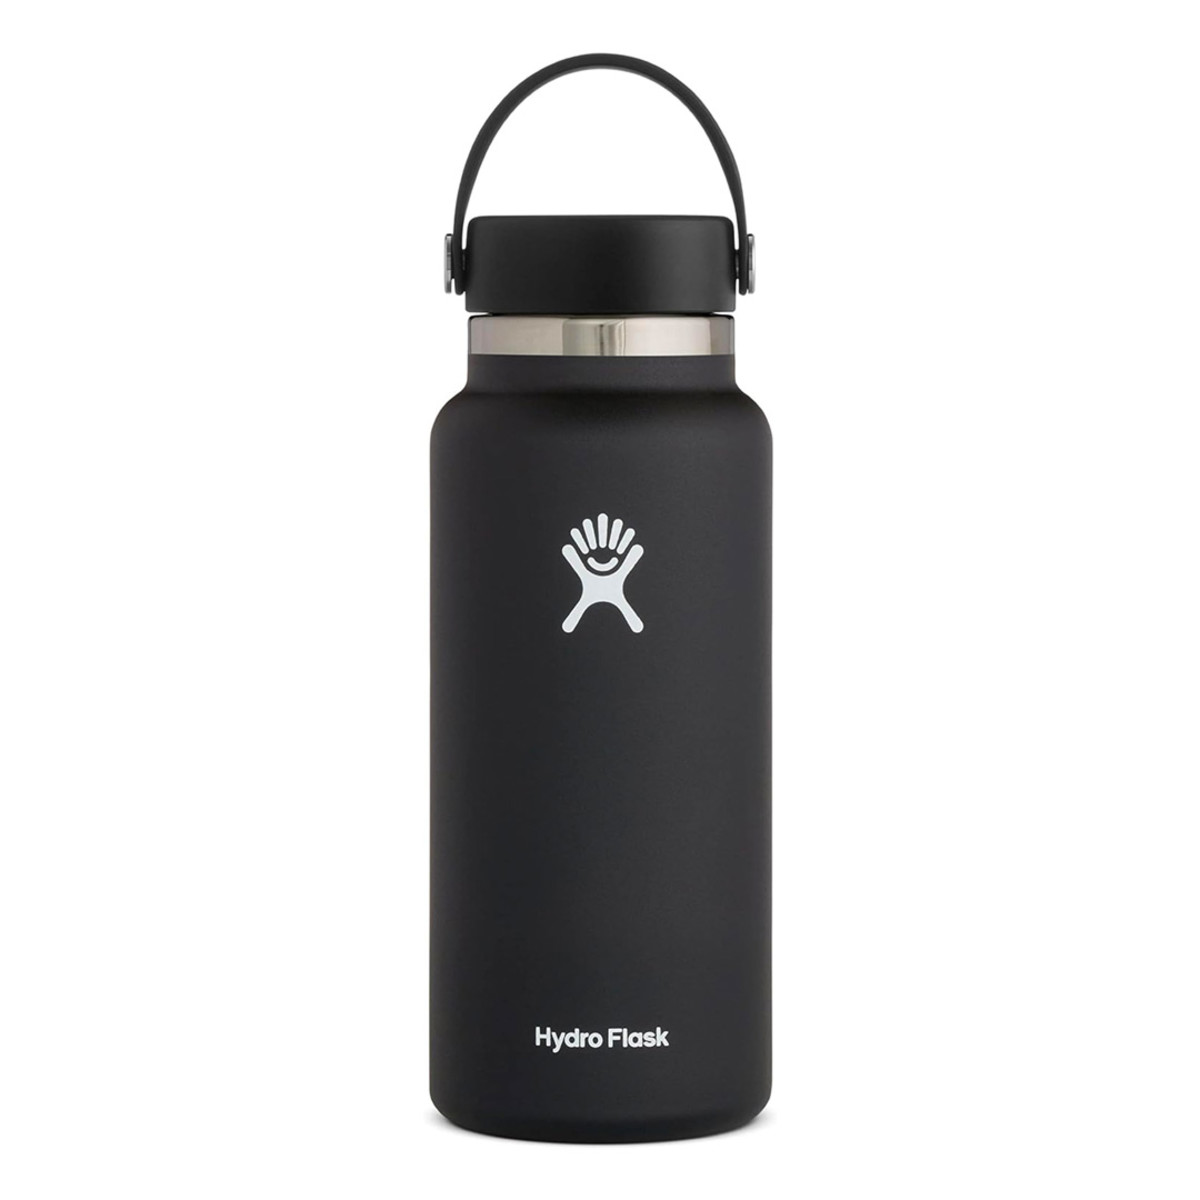 Hydro Flask Sale on All Our Team Favorites - Great Gift Ideas!